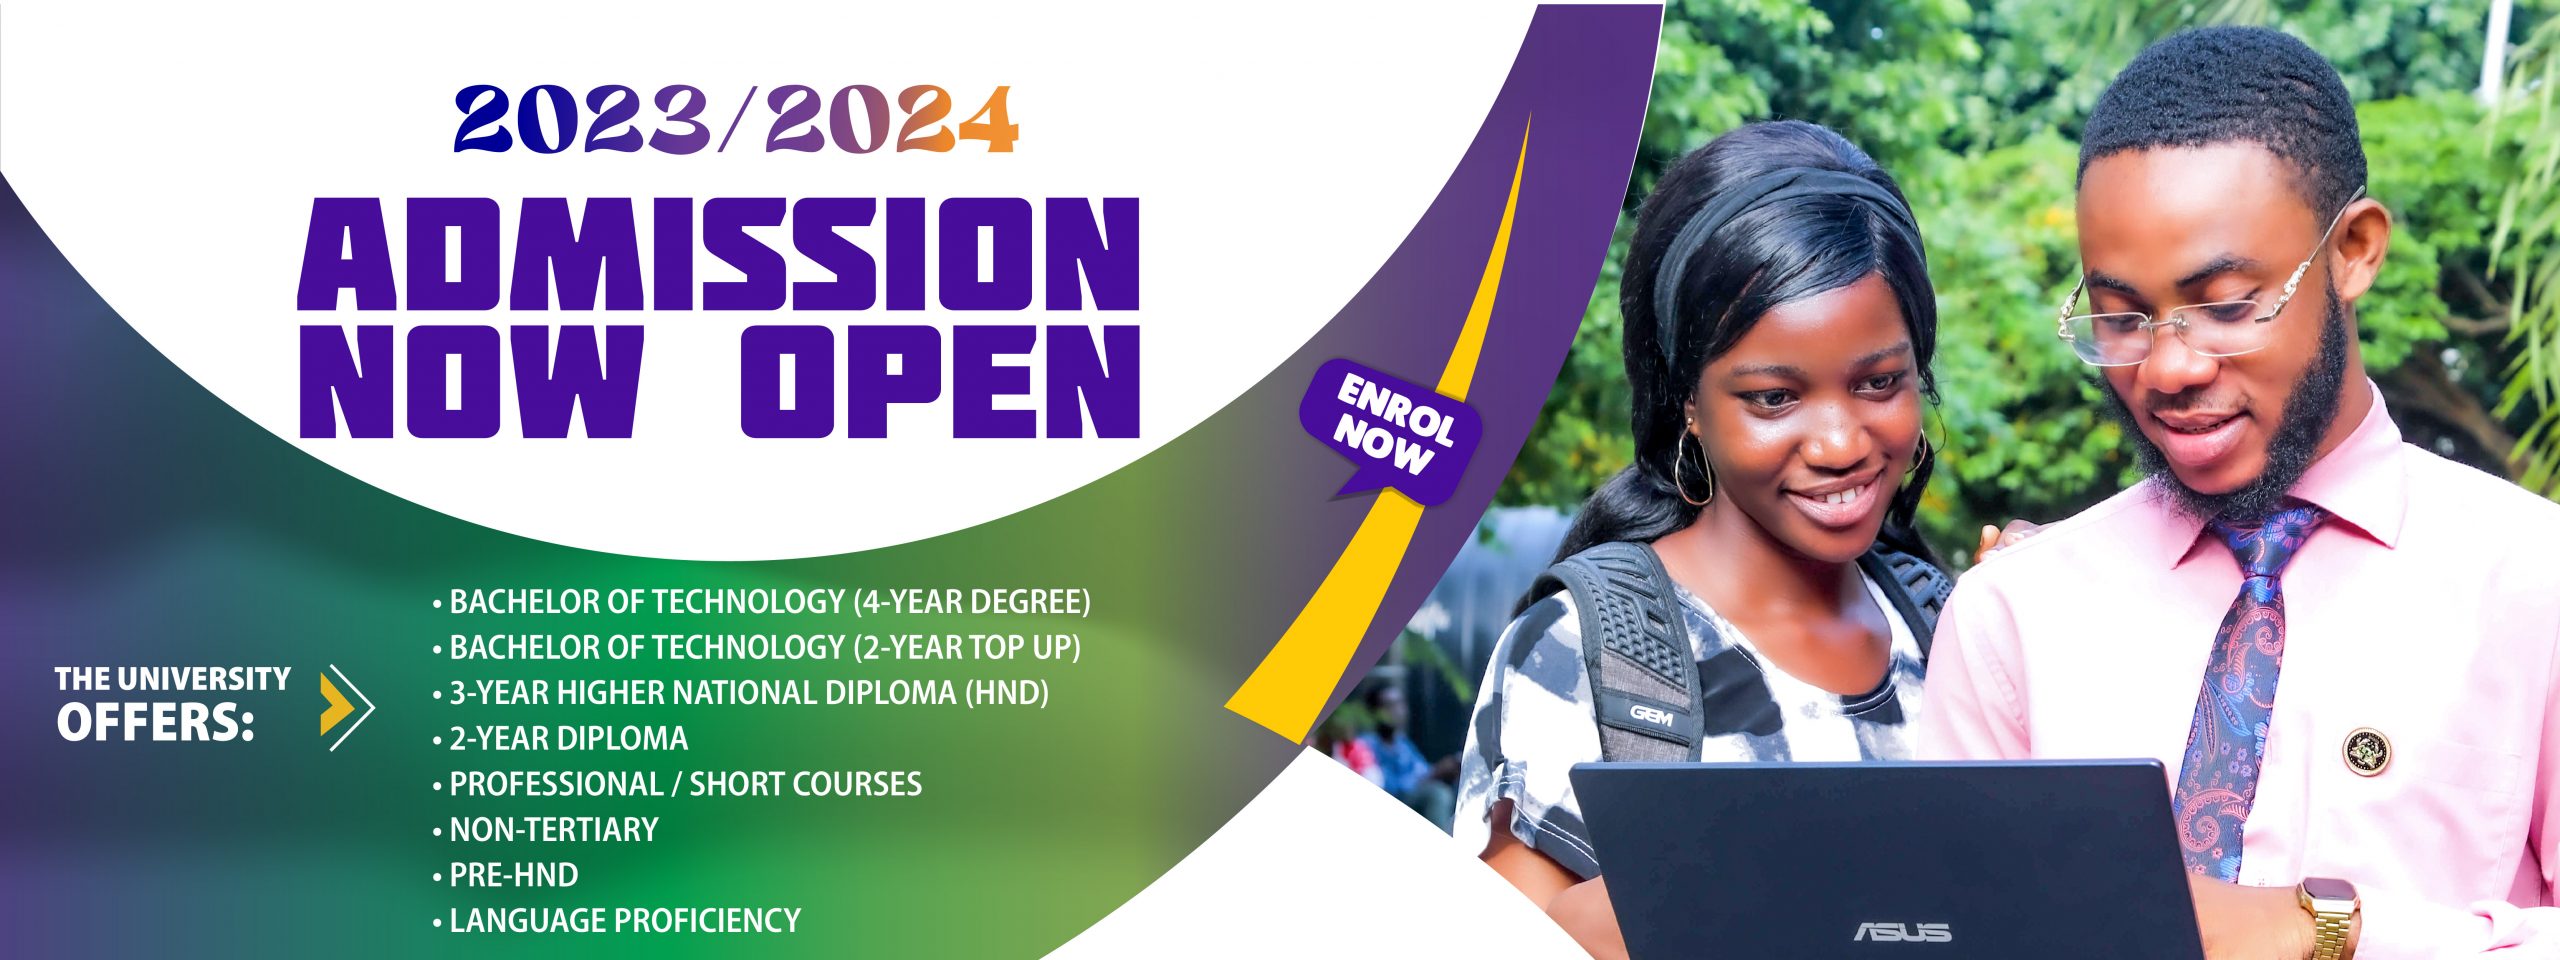 ADMISSION N OW OPEN FORMS-03